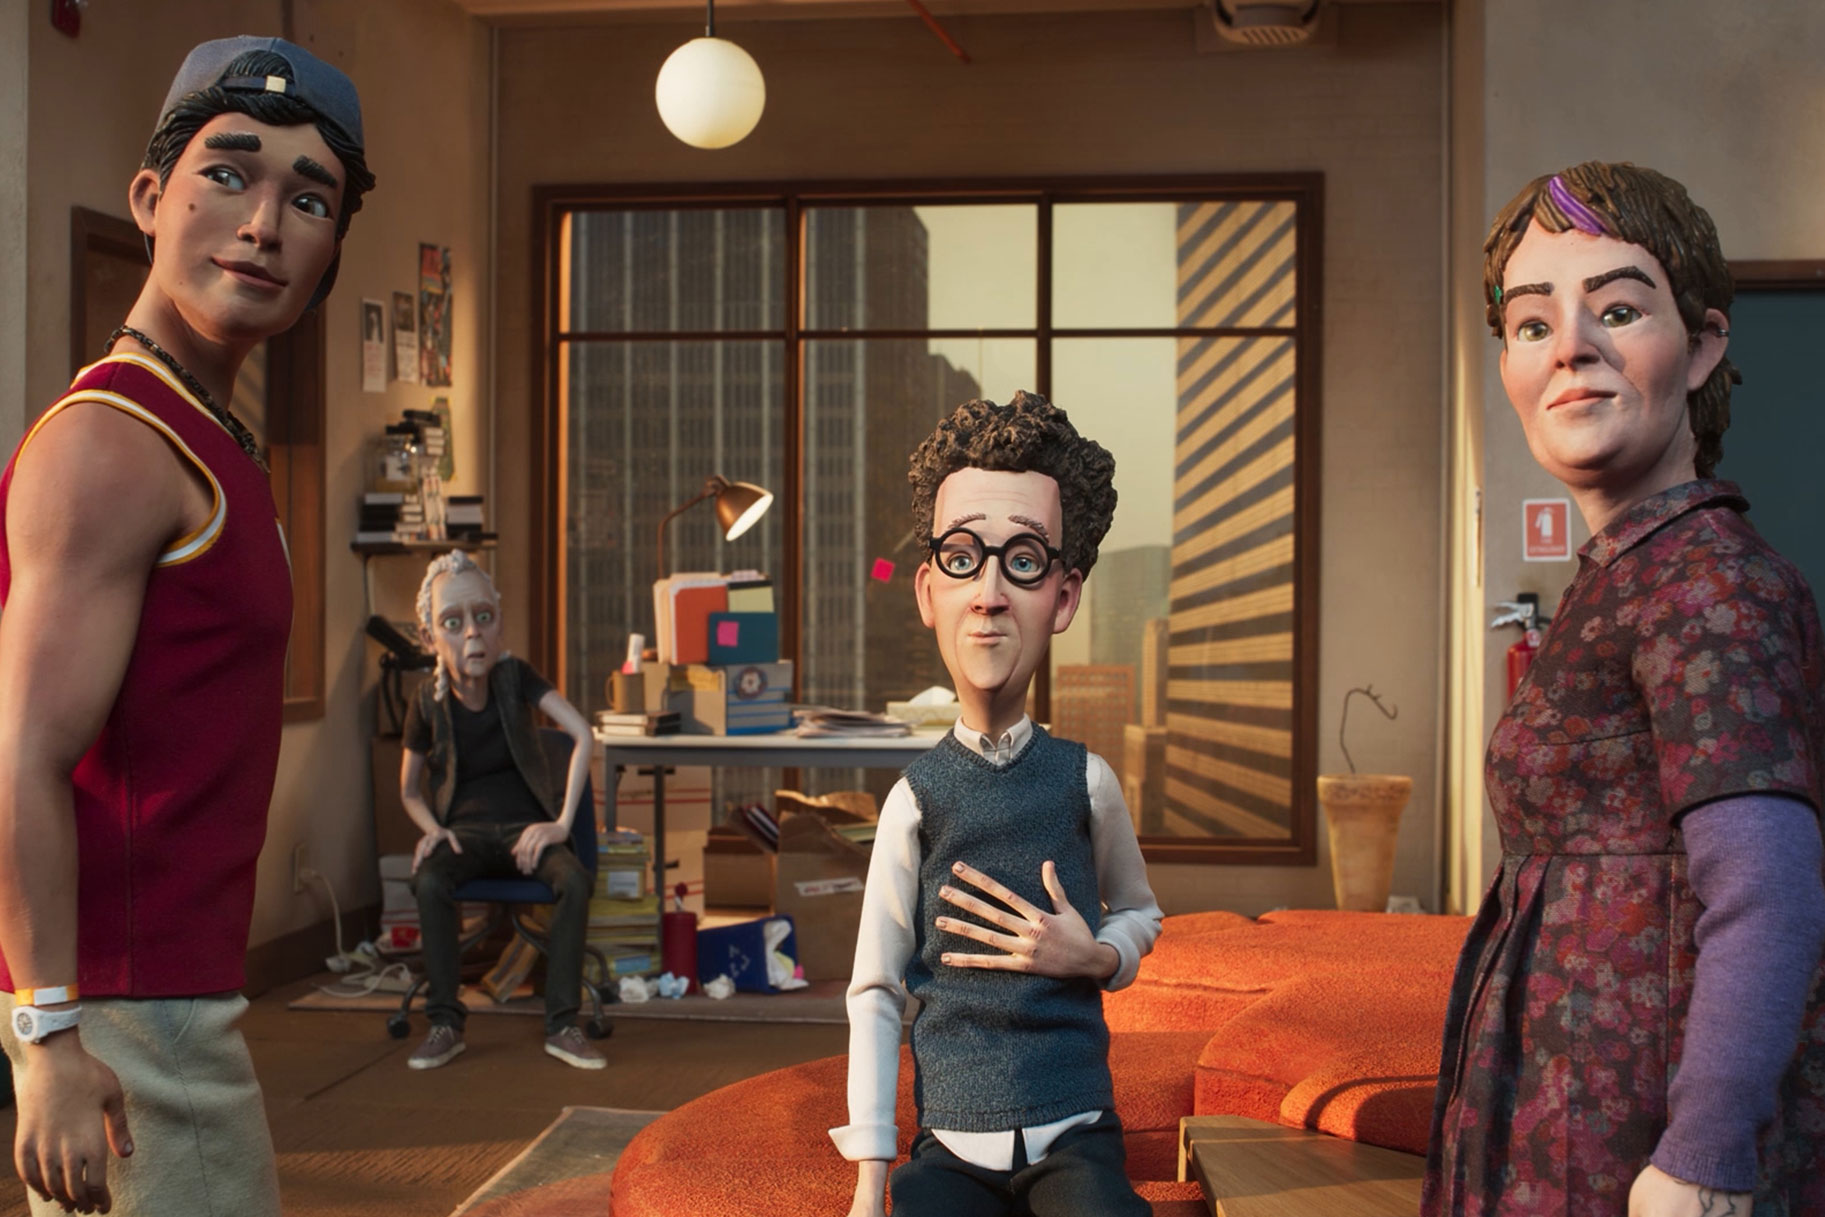 Chase (Voiced by Charlie Bushnell), Sandy (Voiced by Mike Judge), Lauren Caspian (Voiced by Zach Woods), and Fabian (Voiced by Caitlin Reilly appear in Season 1 Episode 5 of In The Know